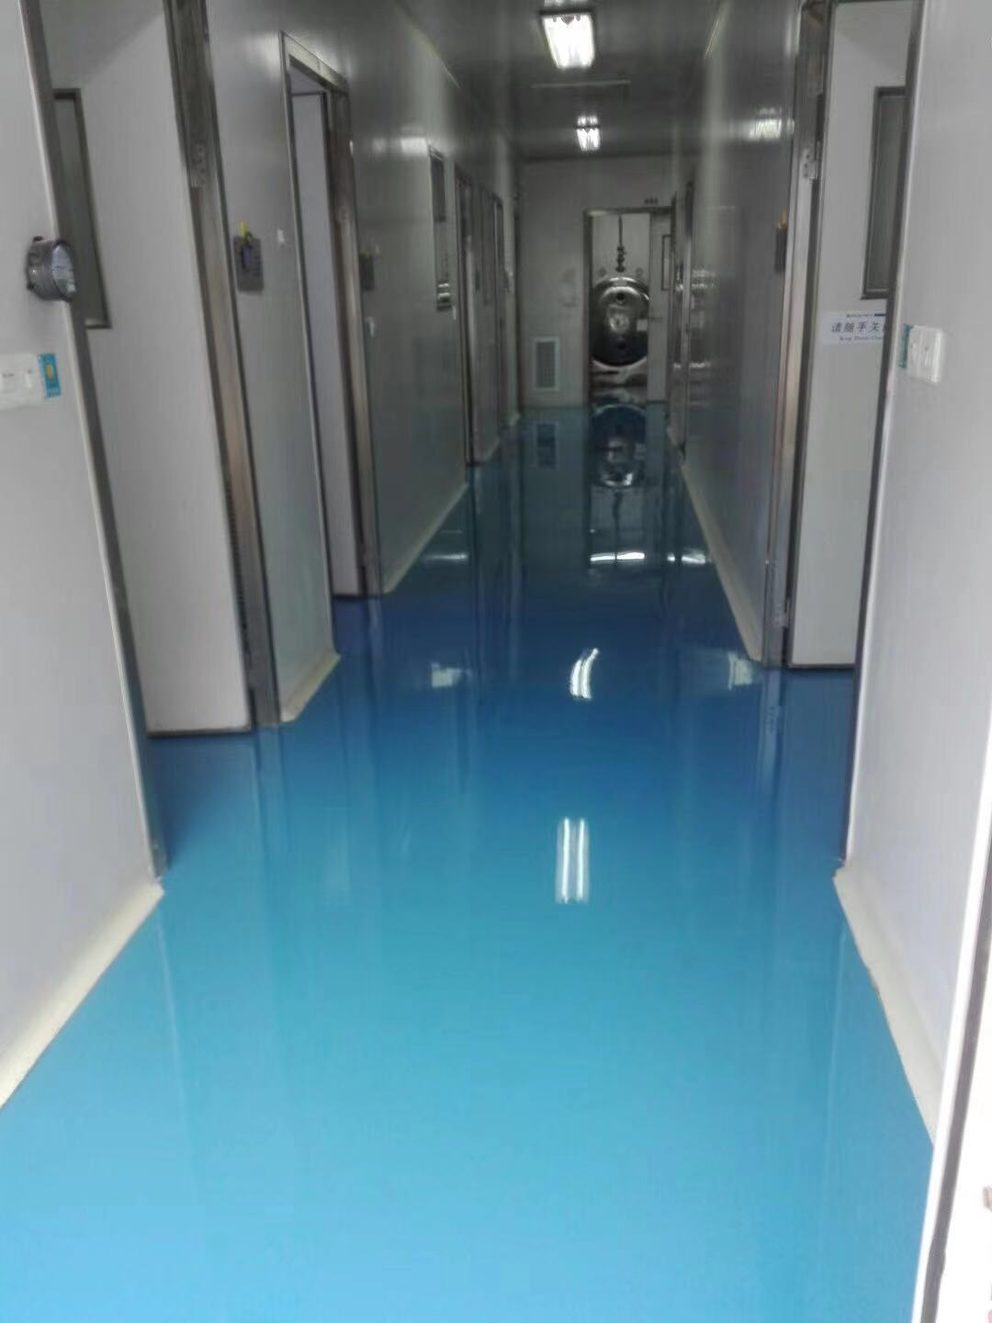 Thick film epoxy resin floor paint for all kinds of hall floors